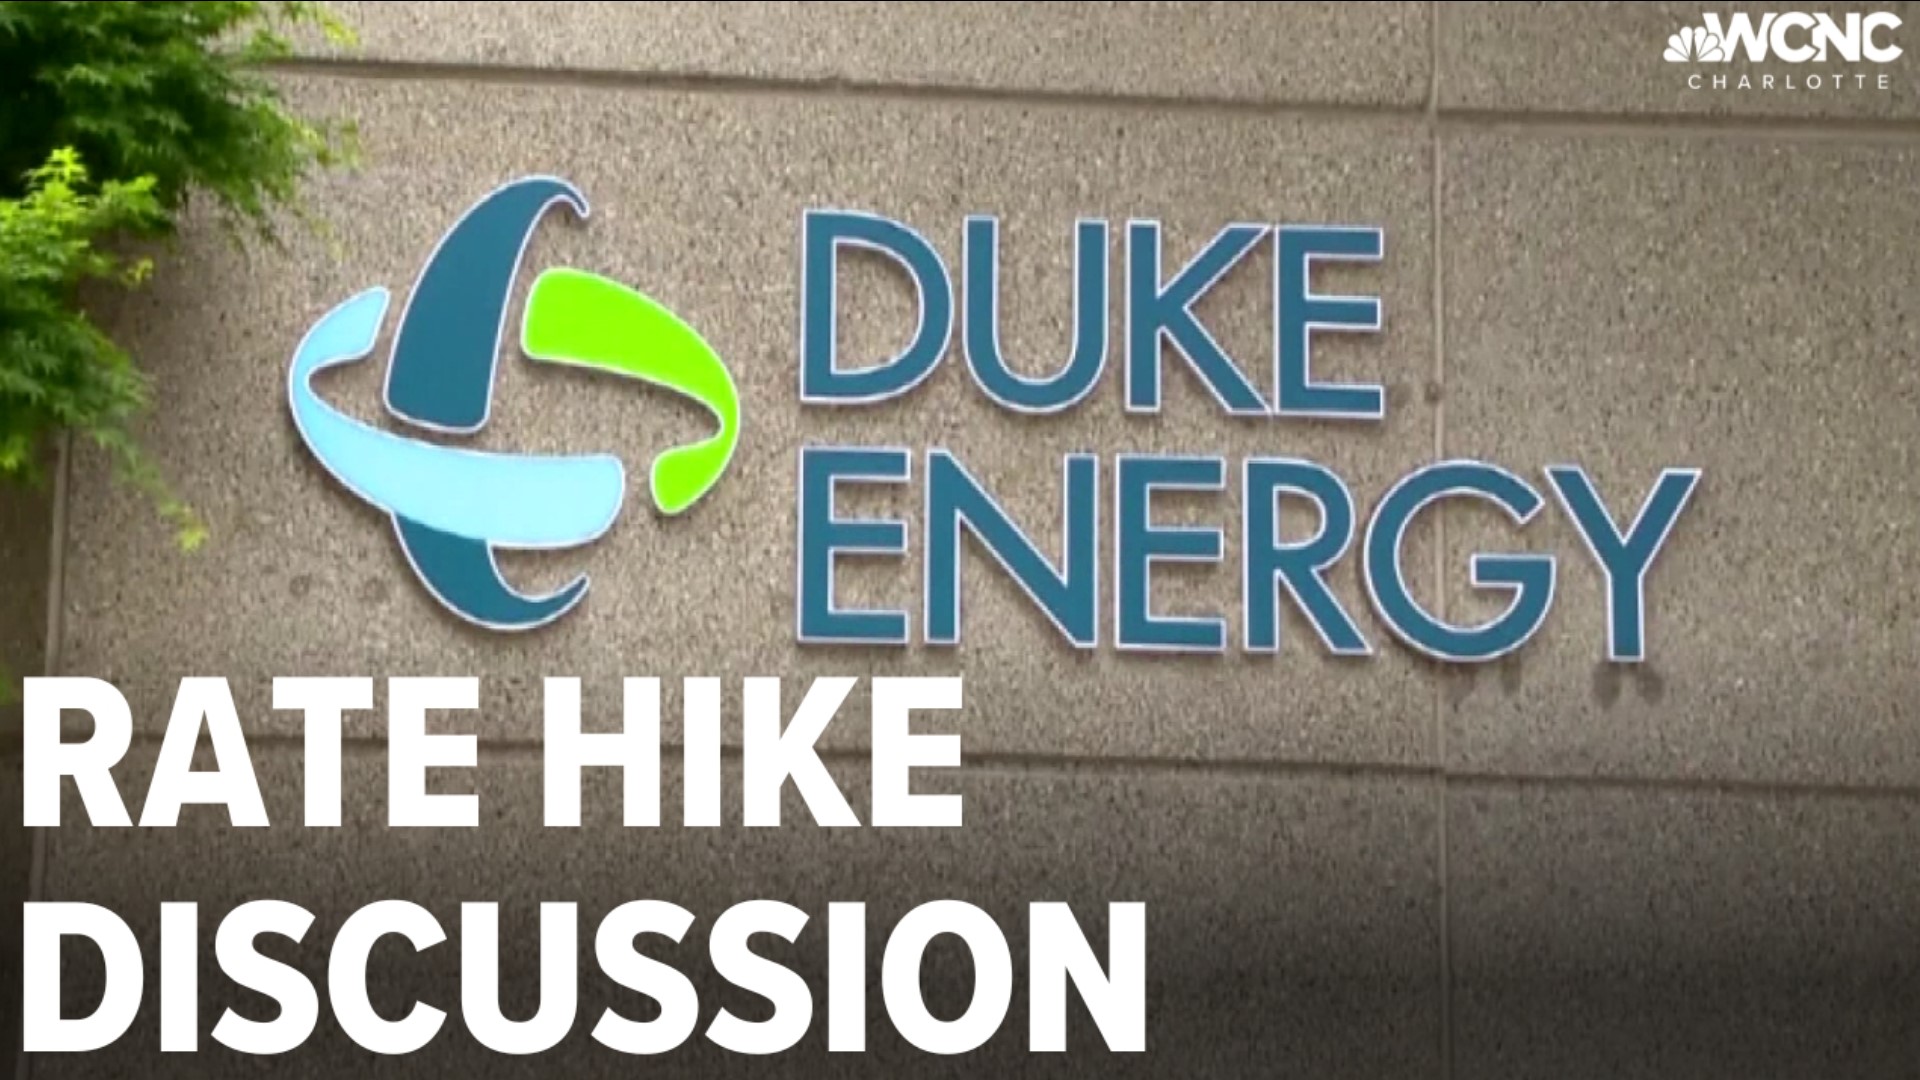 Your Duke Energy bill will likely be going up but it's still unclear exactly by how much.